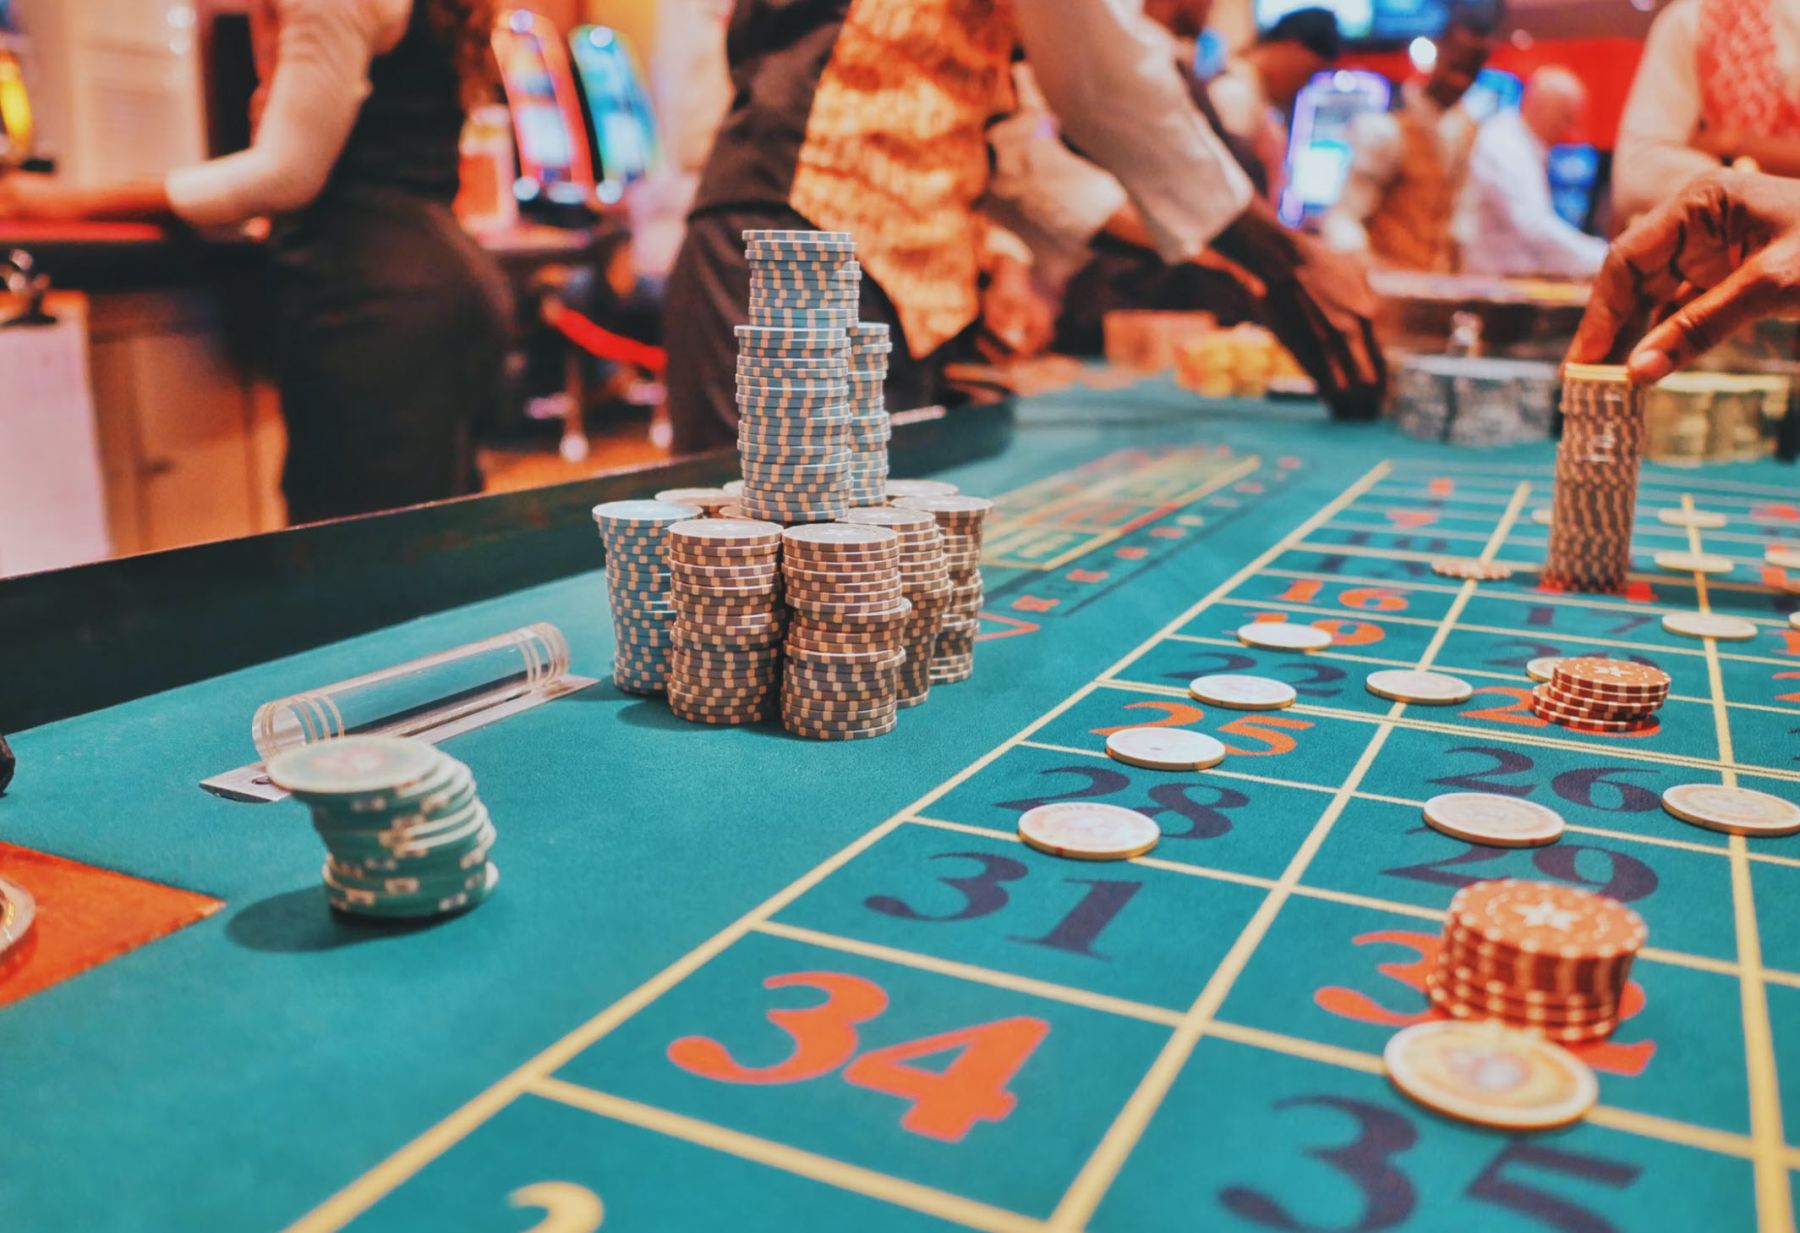 Have You Heard? online bitcoin casino Is Your Best Bet To Grow